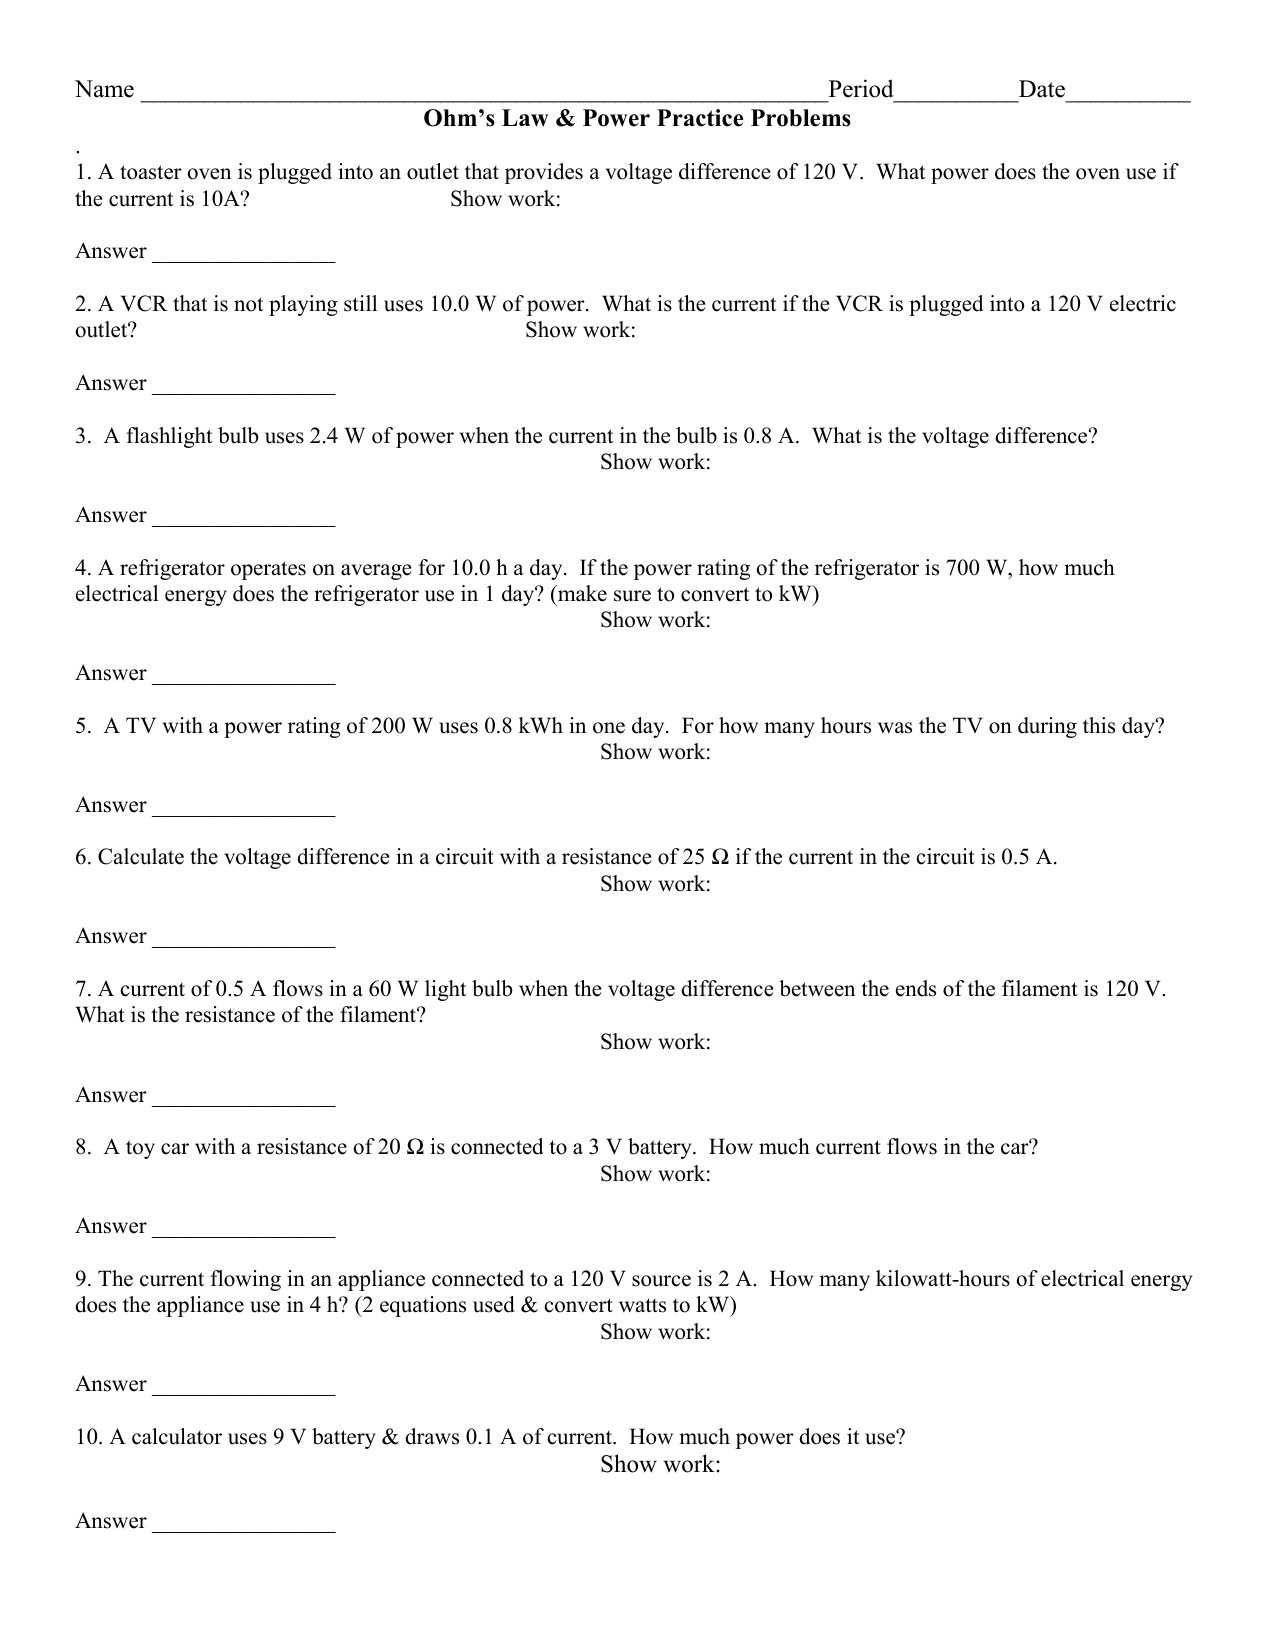 Electrical Power and Energy Worksheet Also Electric Power Problems Worksheet New Ohm Law Practice Problems